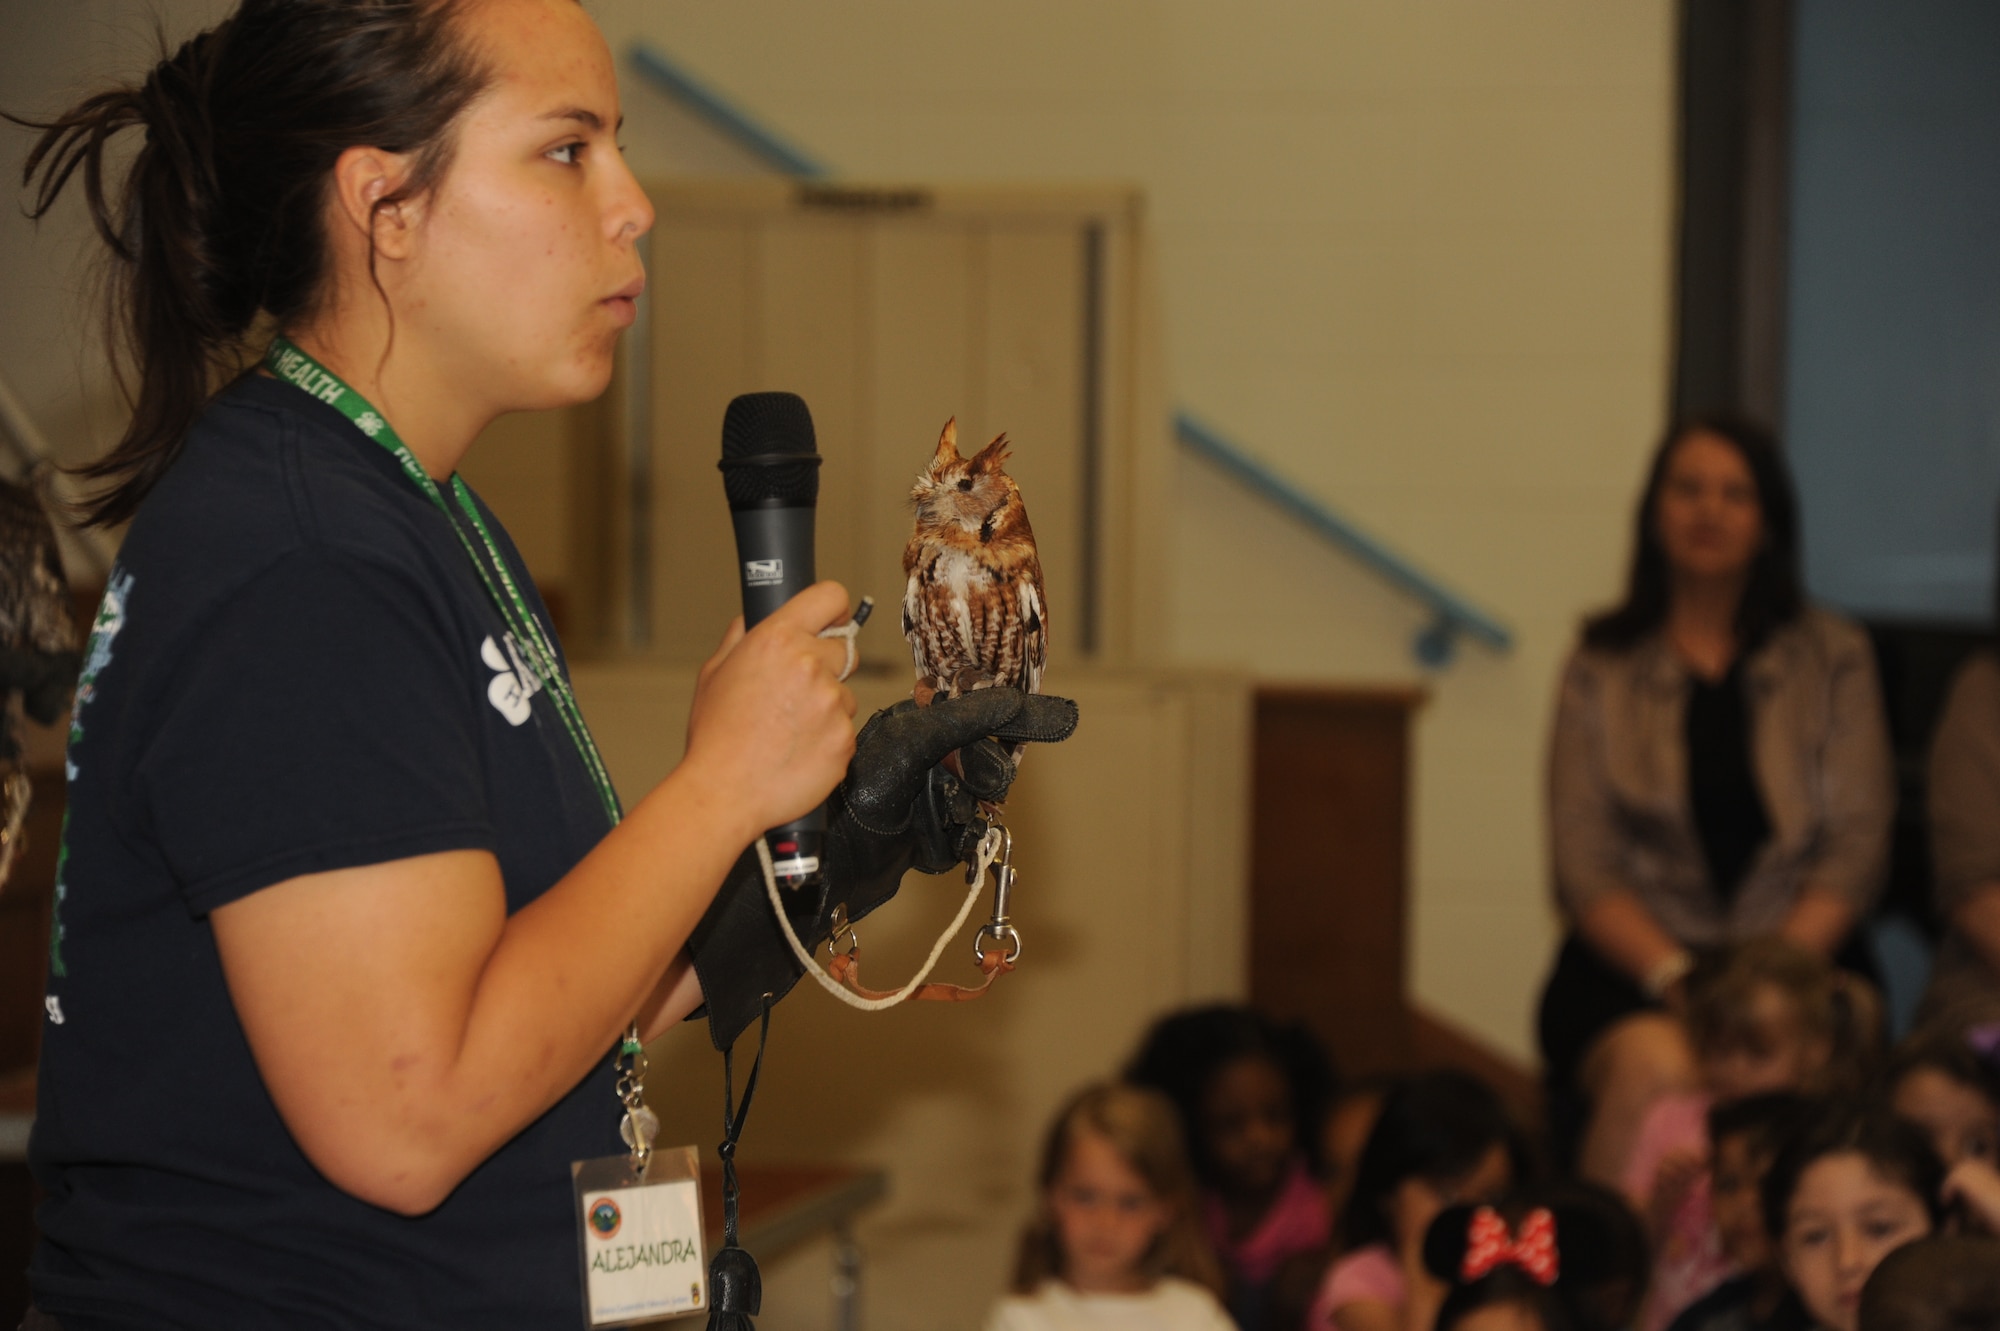 Alejandra Palacio, Alabama 4-H Science School environmental educational instructor, educates Maxwell Elementary and Middle School students about the Eastern Screech Owl during the Birds of Prey demonstration April 8, 2016, at Maxwell Air Force Base, Alabama. Palacio hopes that by educating young students about animals and their environment that it will strike an interest in them to conserve our resources and protect the wildlife. (U.S. Air Force photo by Airman 1st Class Alexa Culbert)